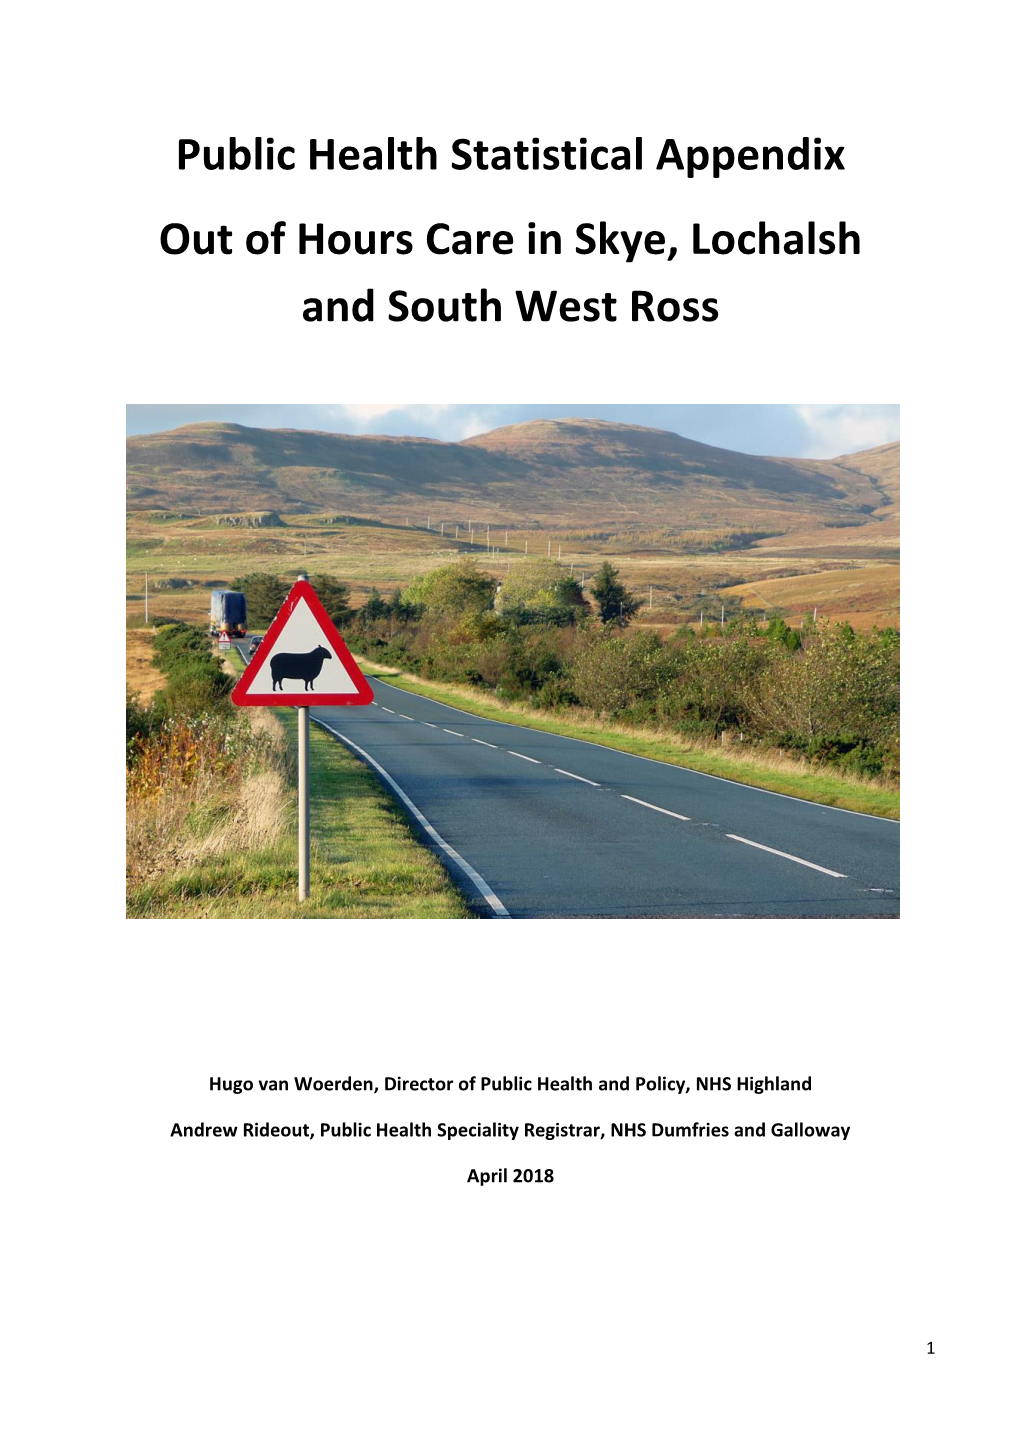 Public Health Statistical Appendix out of Hours Care in Skye, Lochalsh and South West Ross